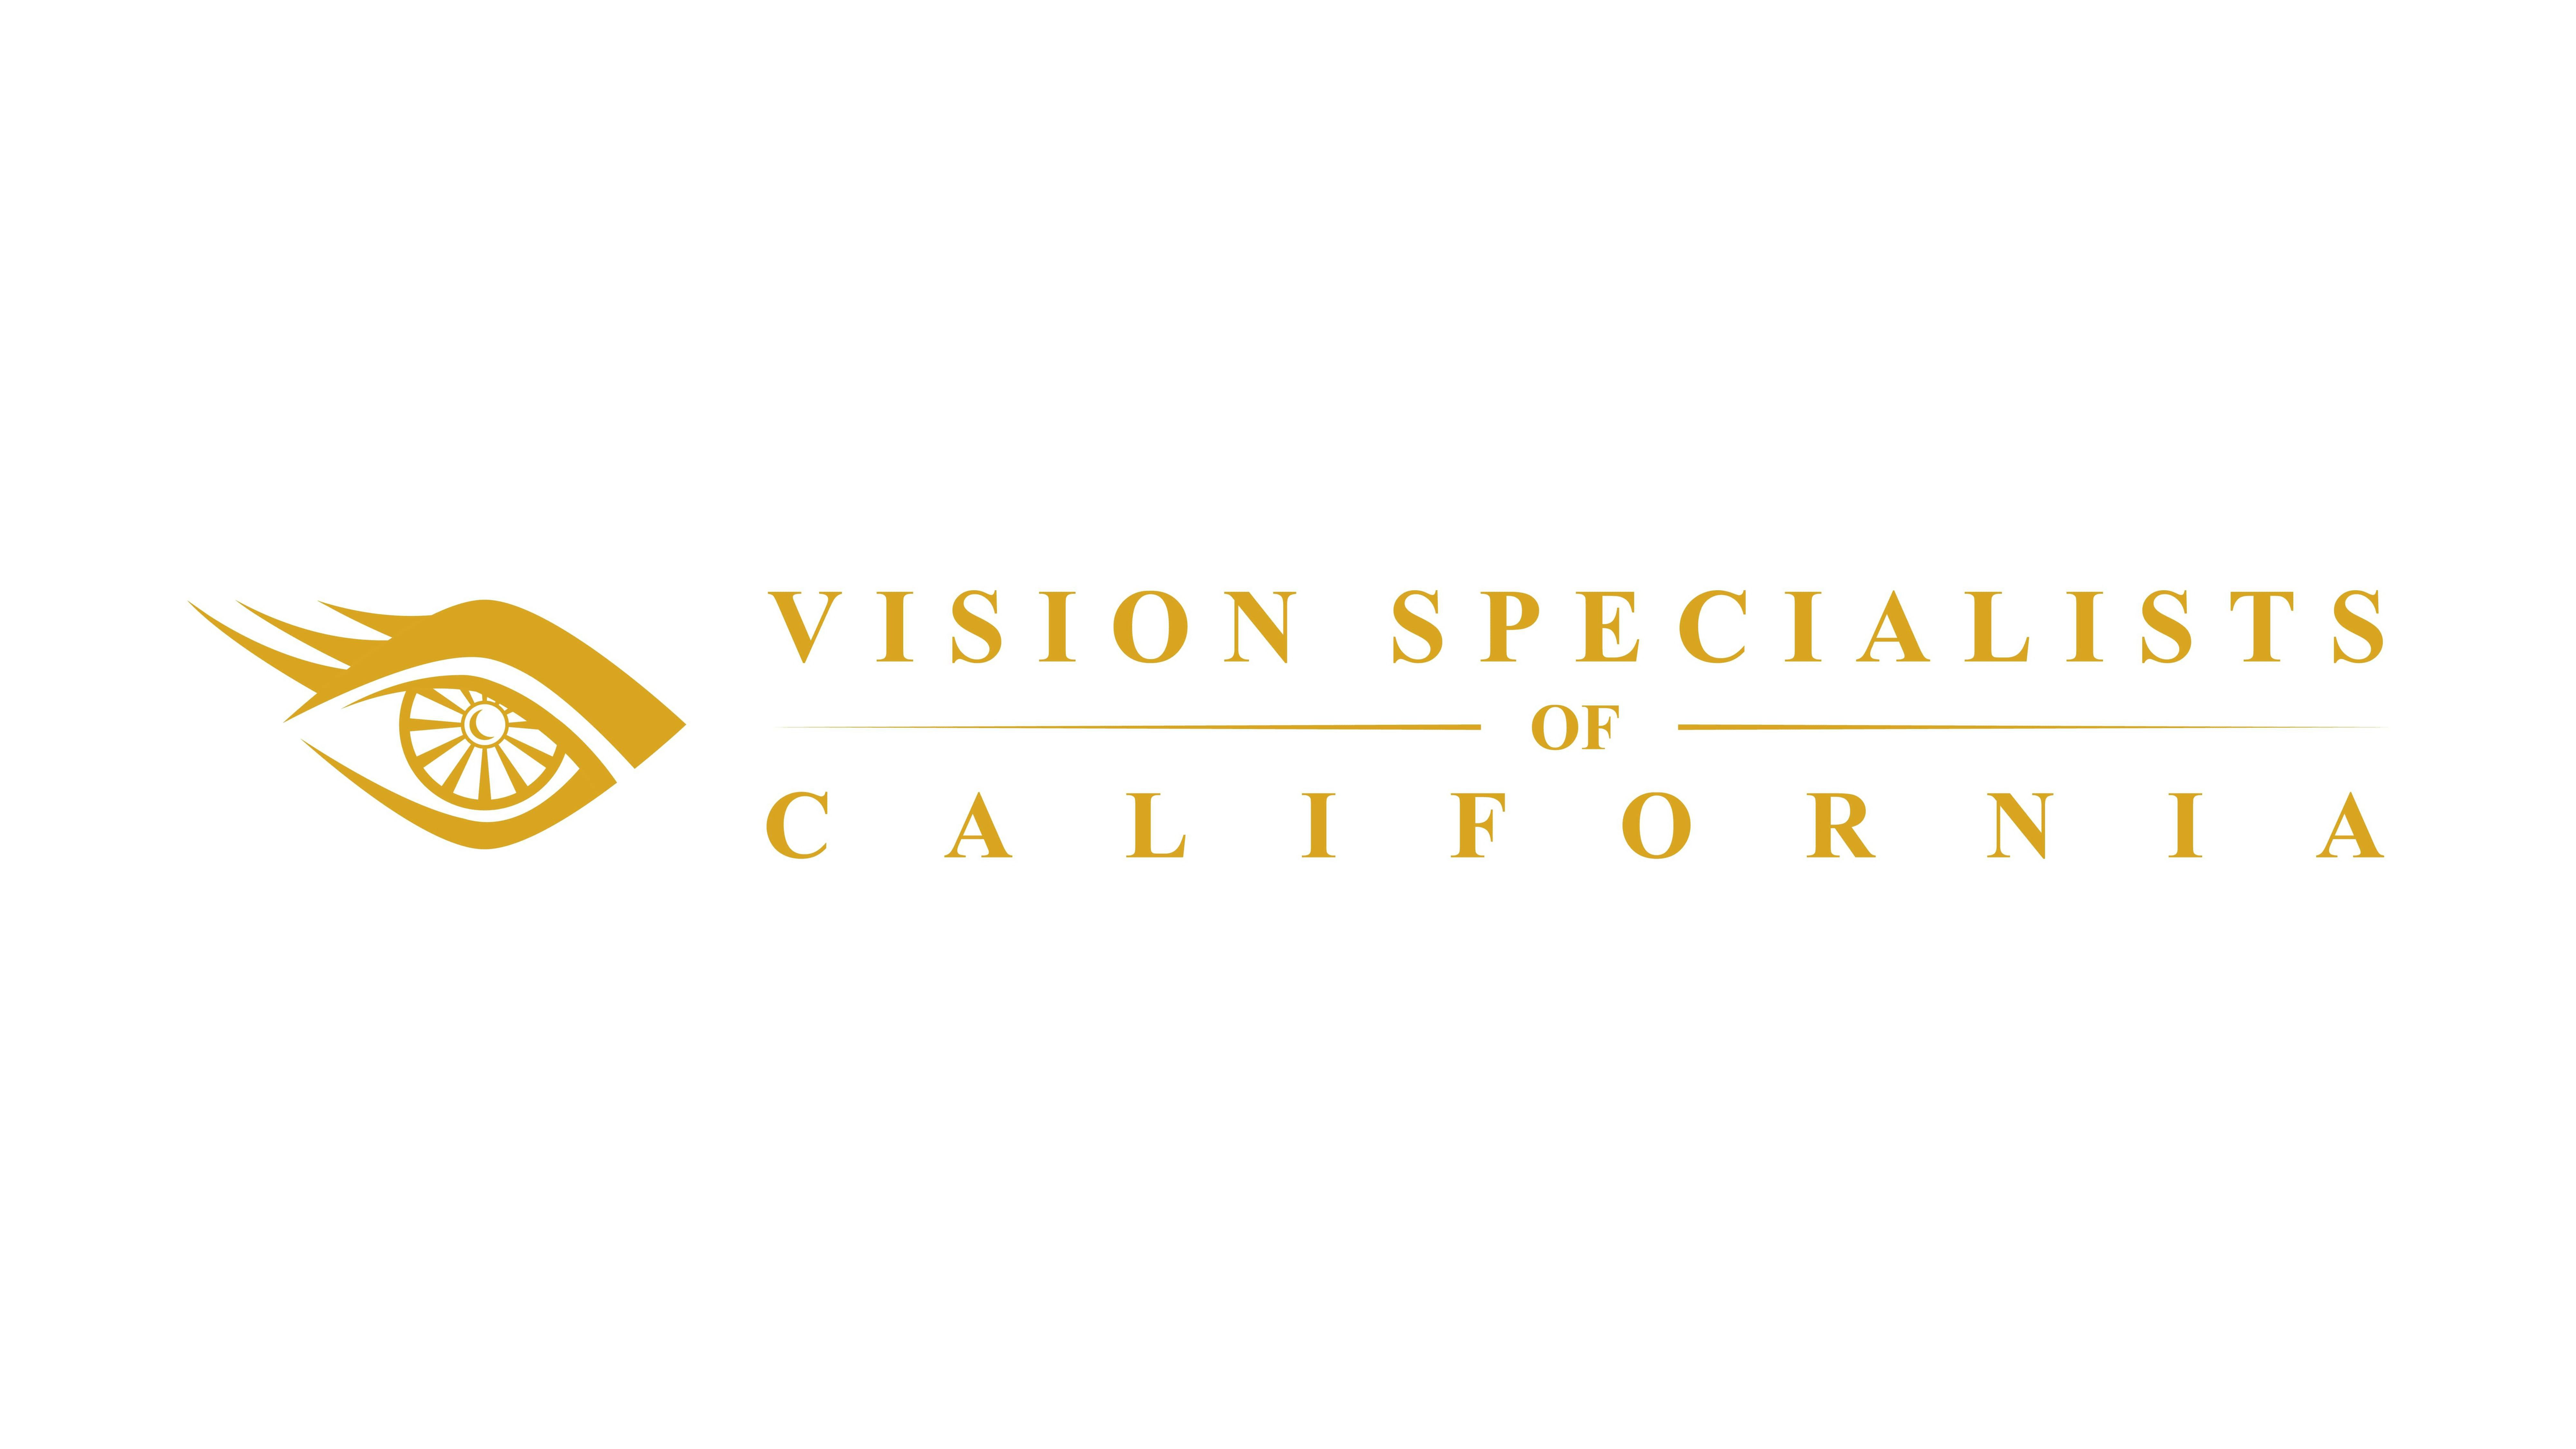  VISION SPECIALISTS OF CALIFORNIA